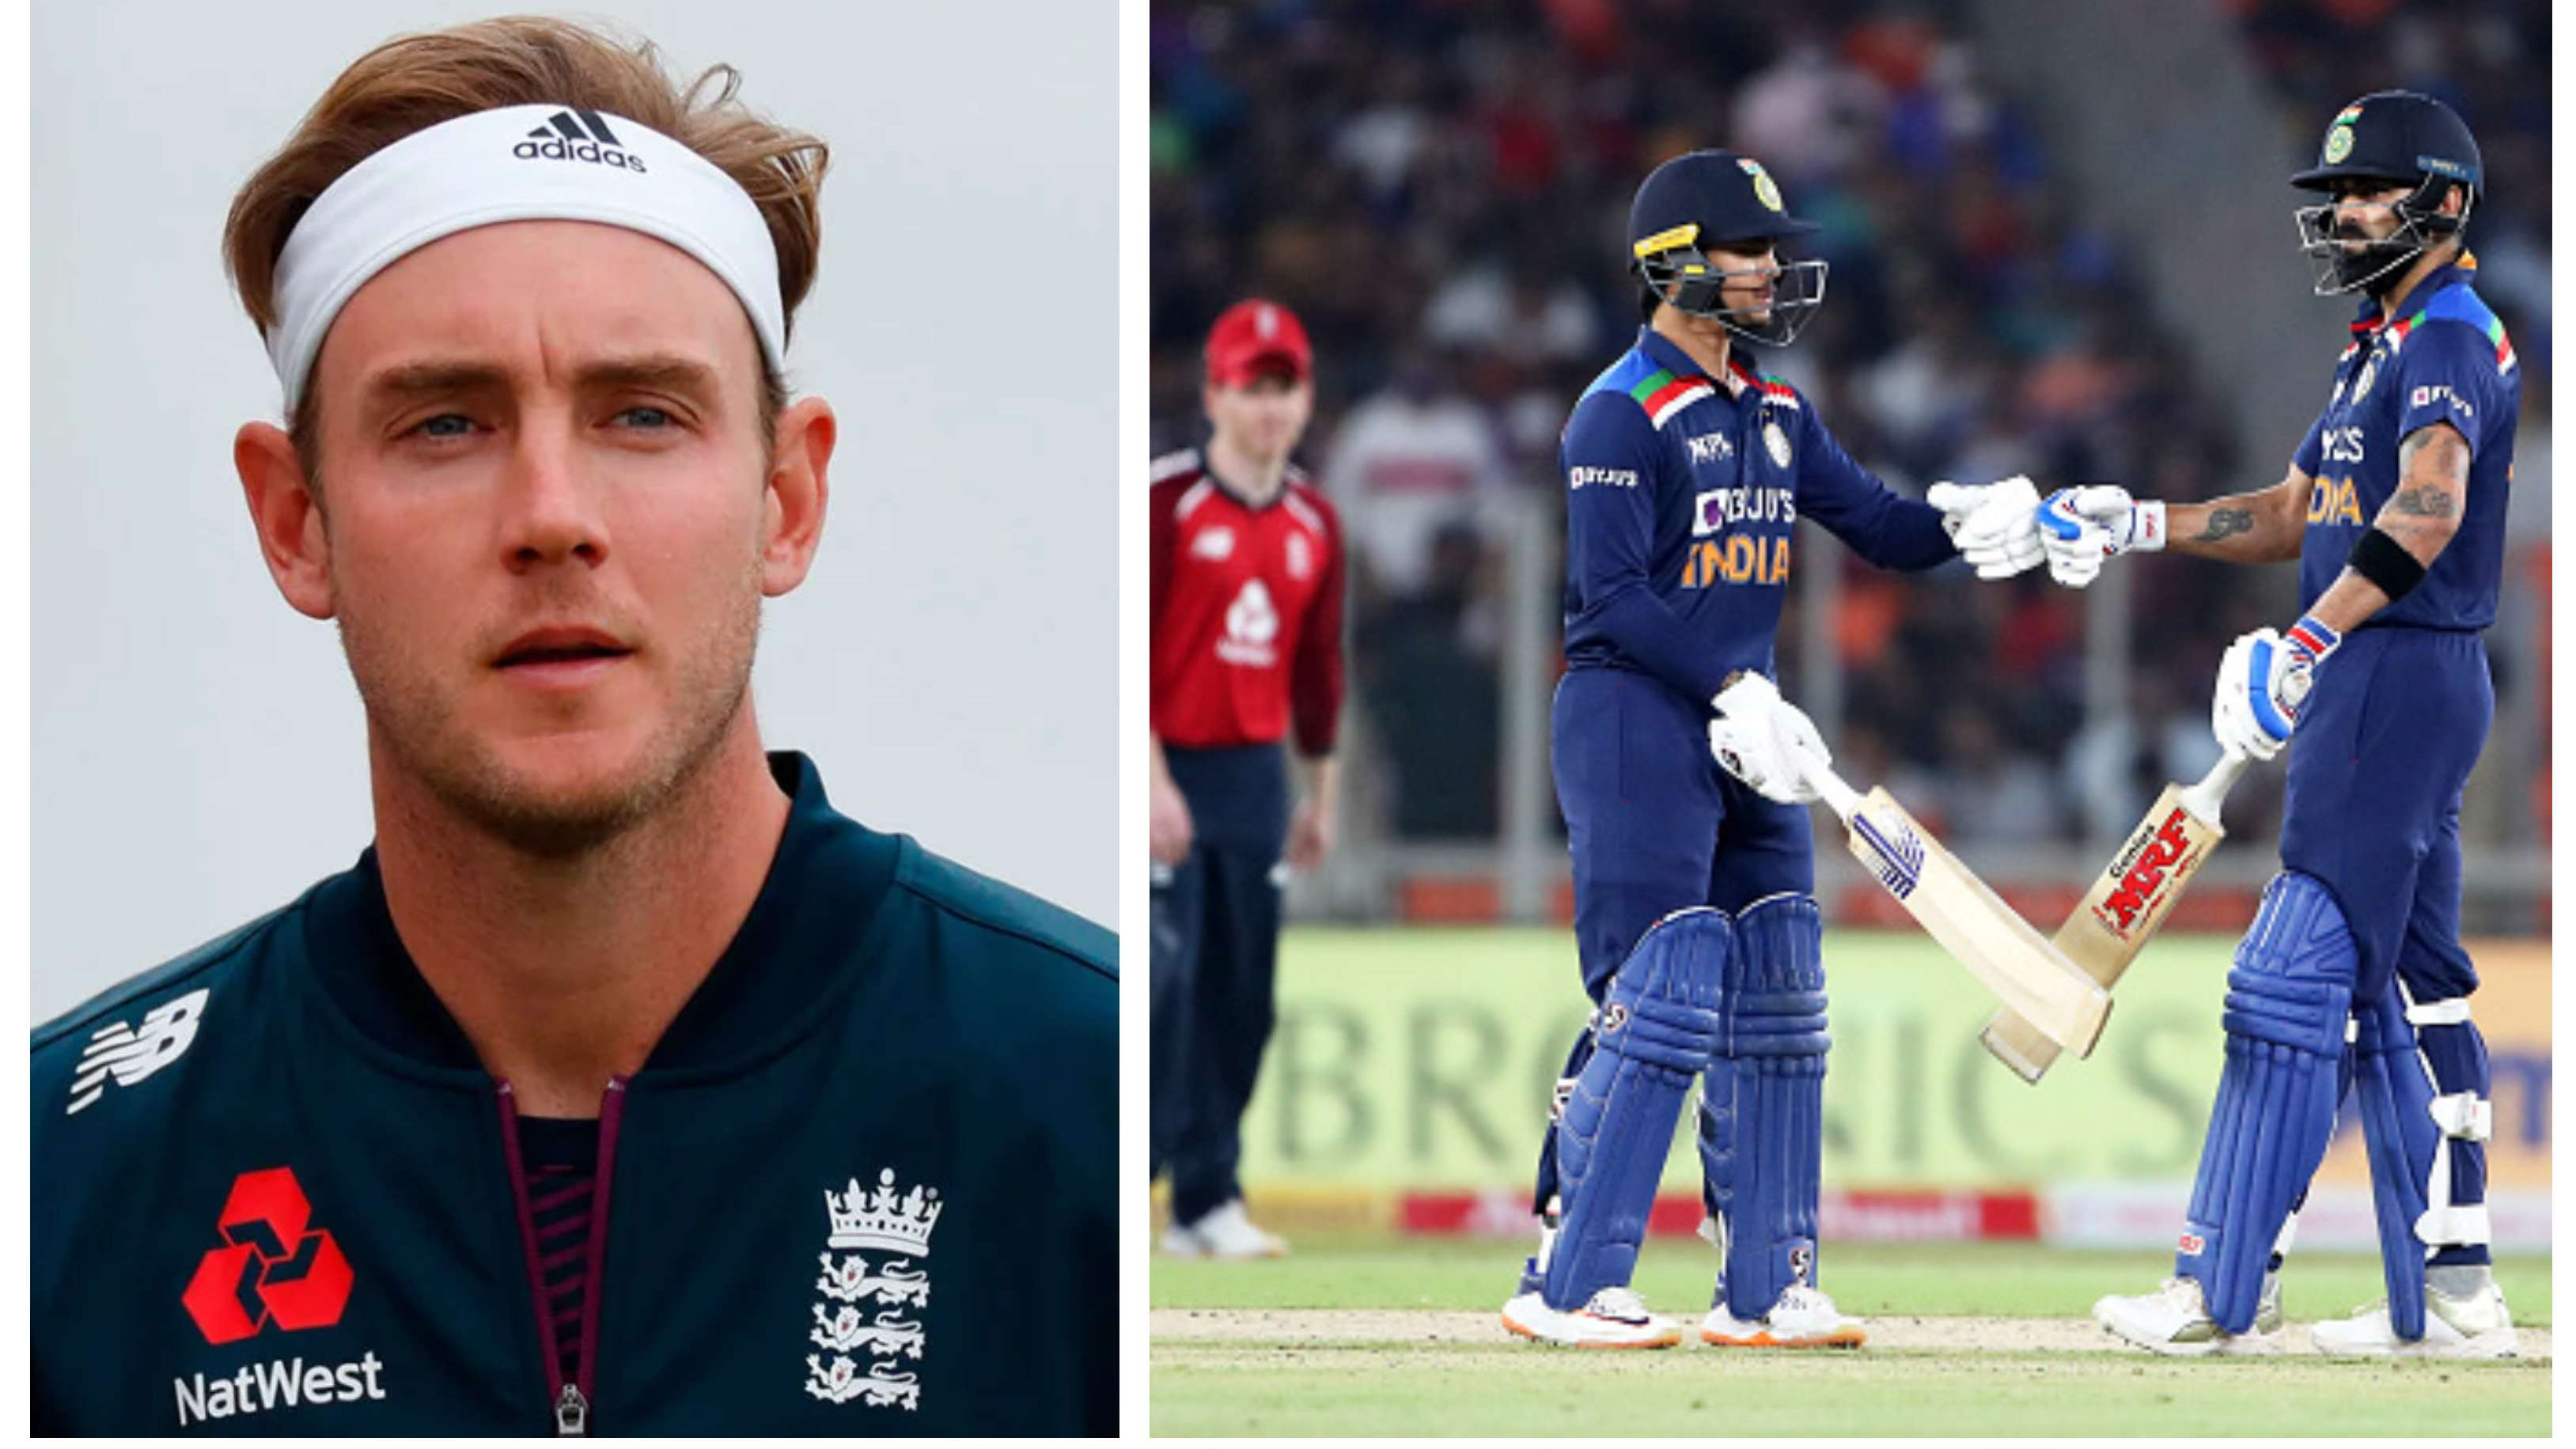 IND v ENG 2021: ‘It was beautiful to watch’, Stuart Broad in awe of Kishan and Kohli’s batting in 2nd T20I